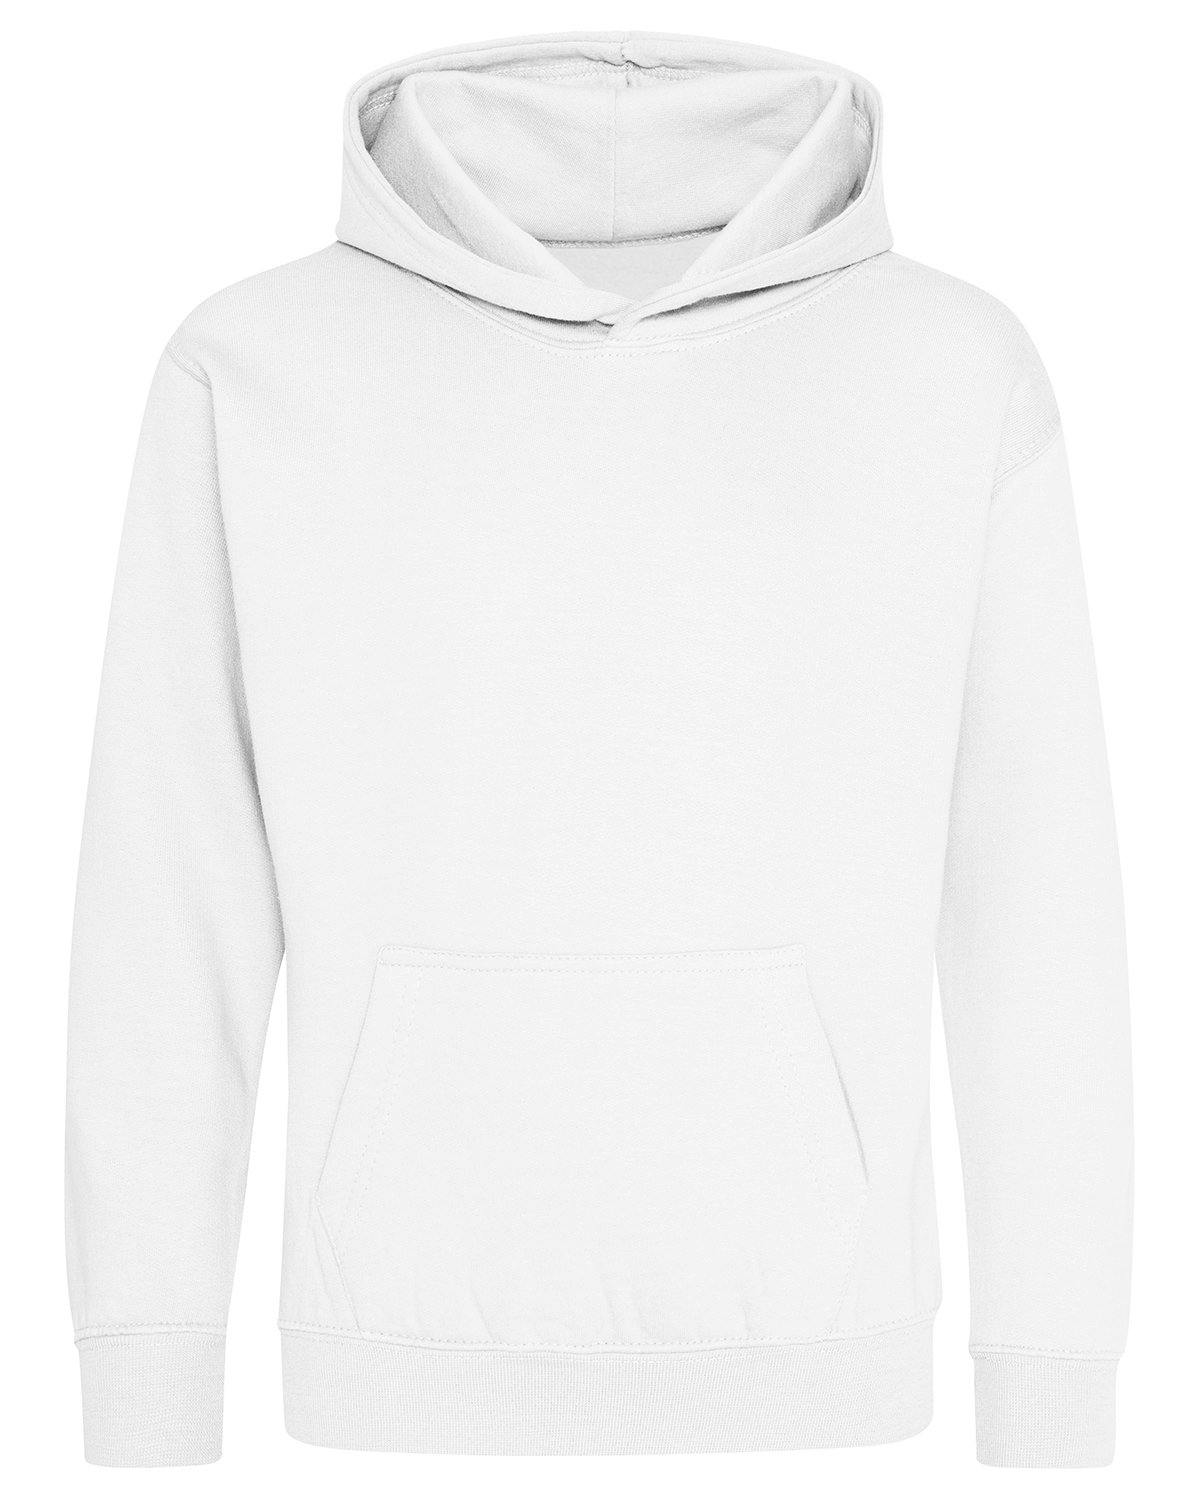 Image for Youth 80/20 Midweight College Hooded Sweatshirt